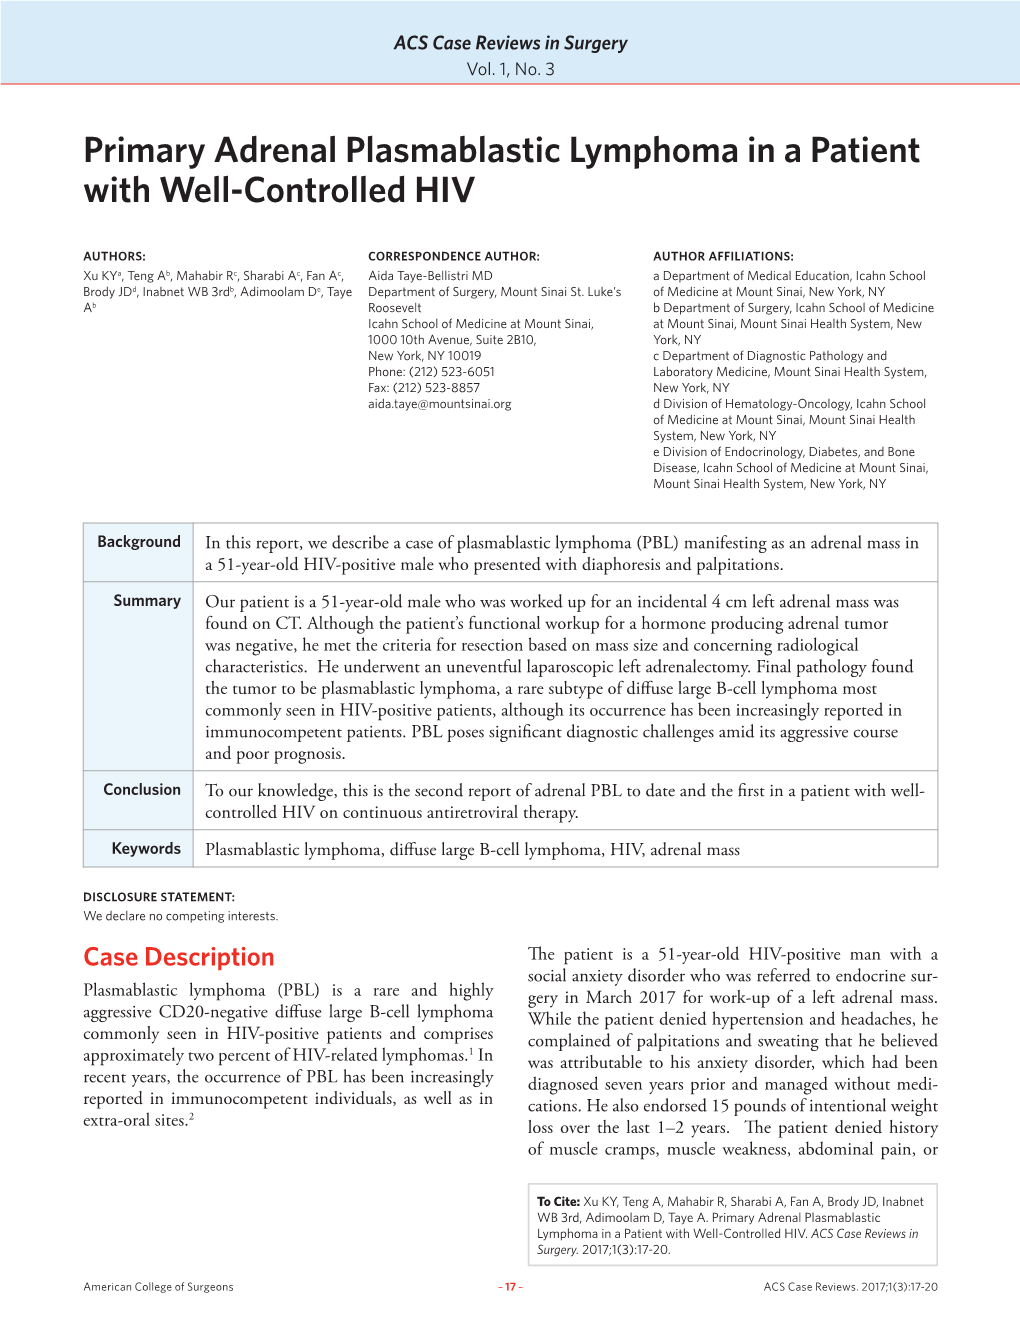 Primary Adrenal Plasmablastic Lymphoma in a Patient with Well-Controlled HIV